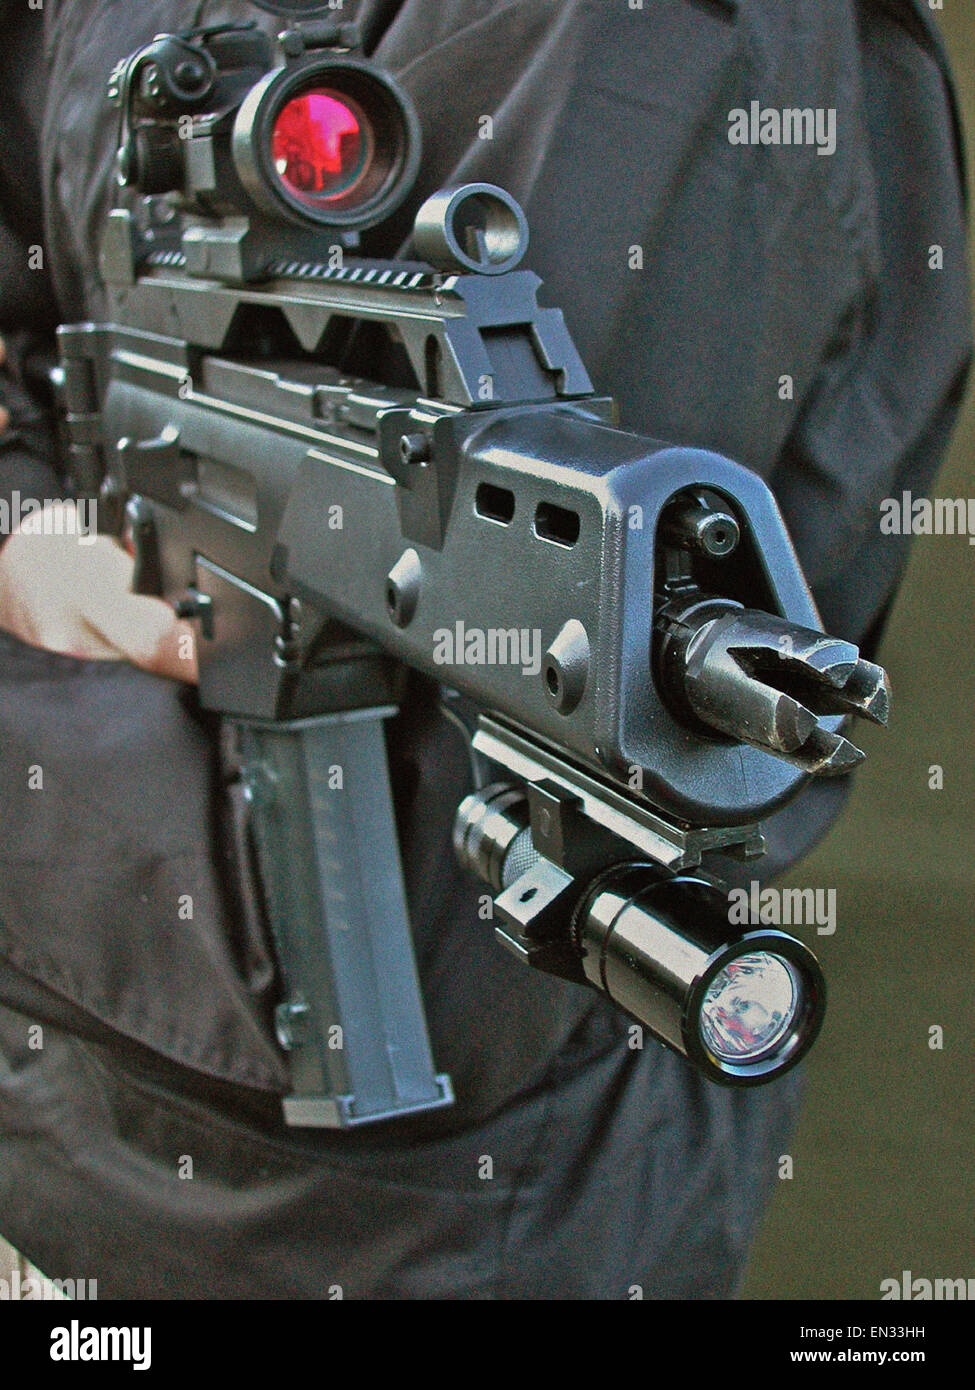 A Heckler & Koch  G36 C (5.56mm x 45 NATO calibre  gas operated assault rifle) favoured by British law enforcement (Police). It has the dimensions of a submachine gun combined with the penetration capability of the 5.56 NATO calibre. Stock Photo